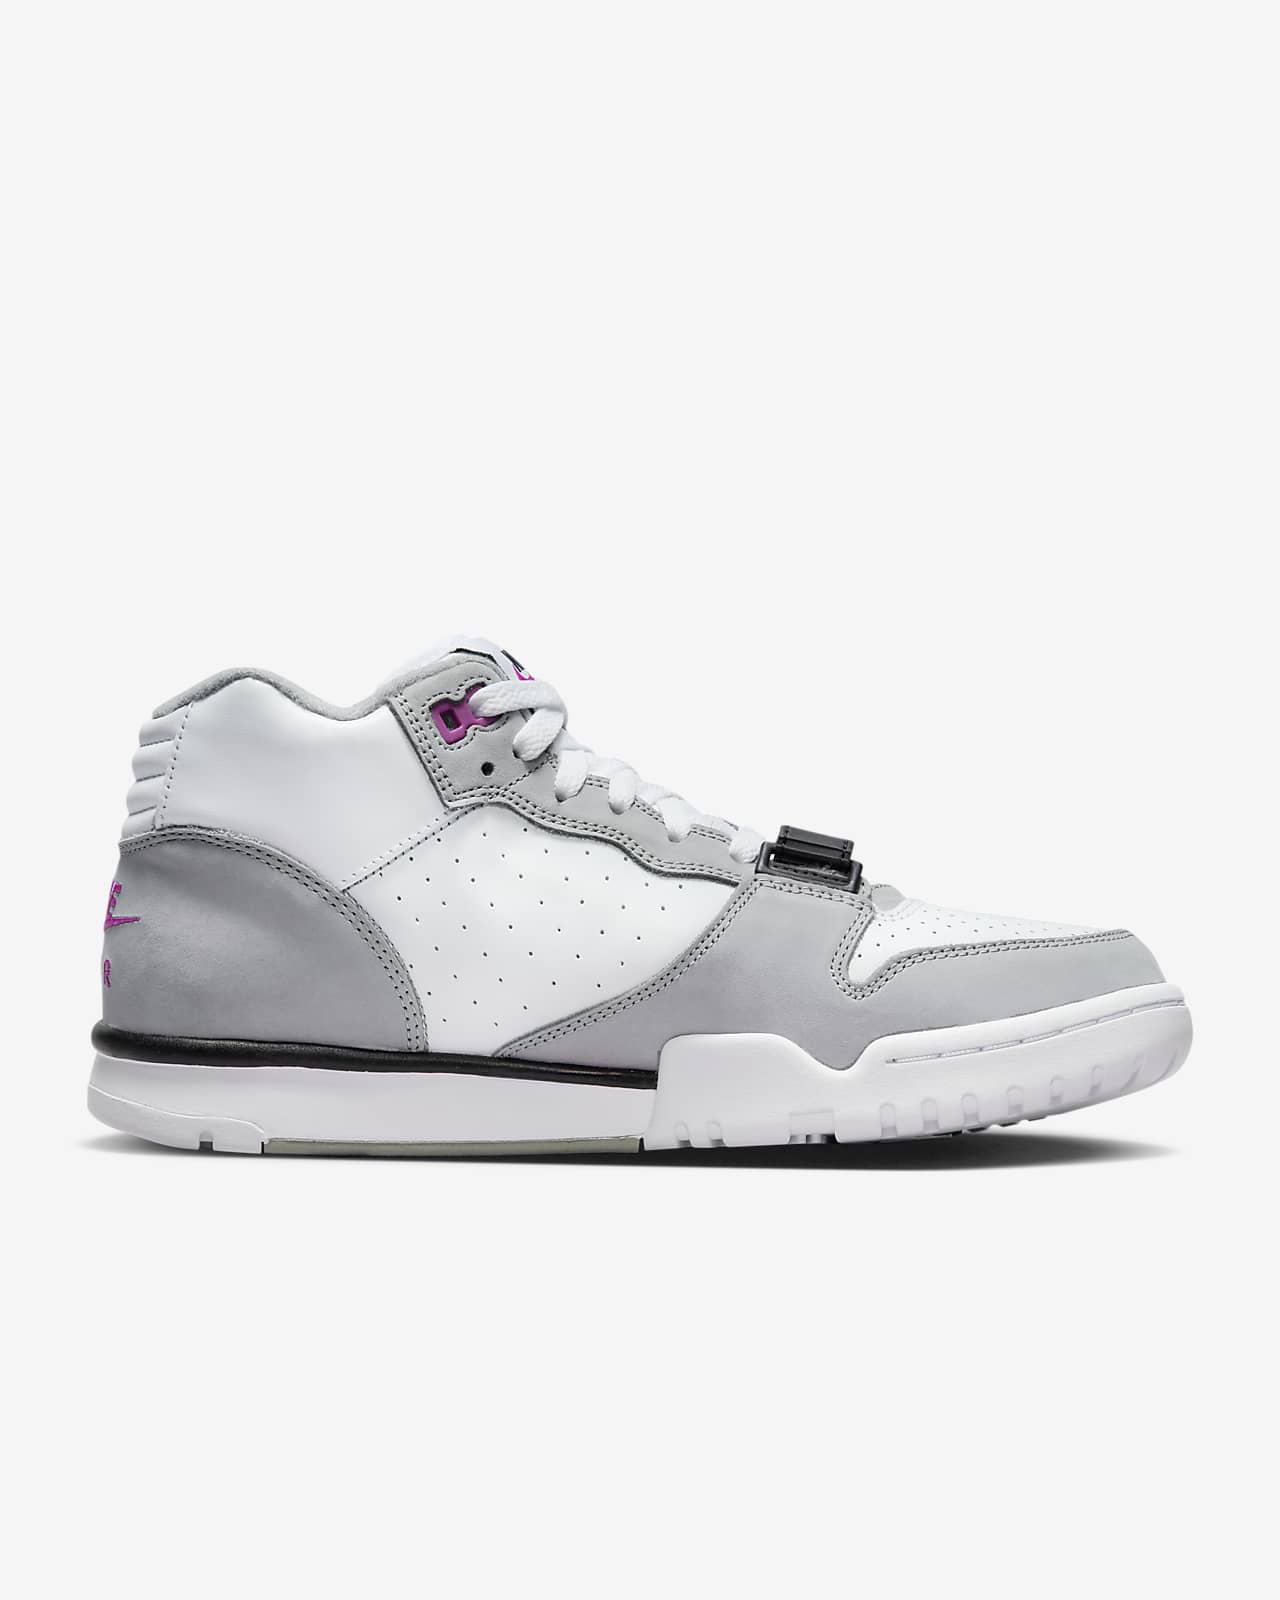 Nike Air Trainer 1 Shoes